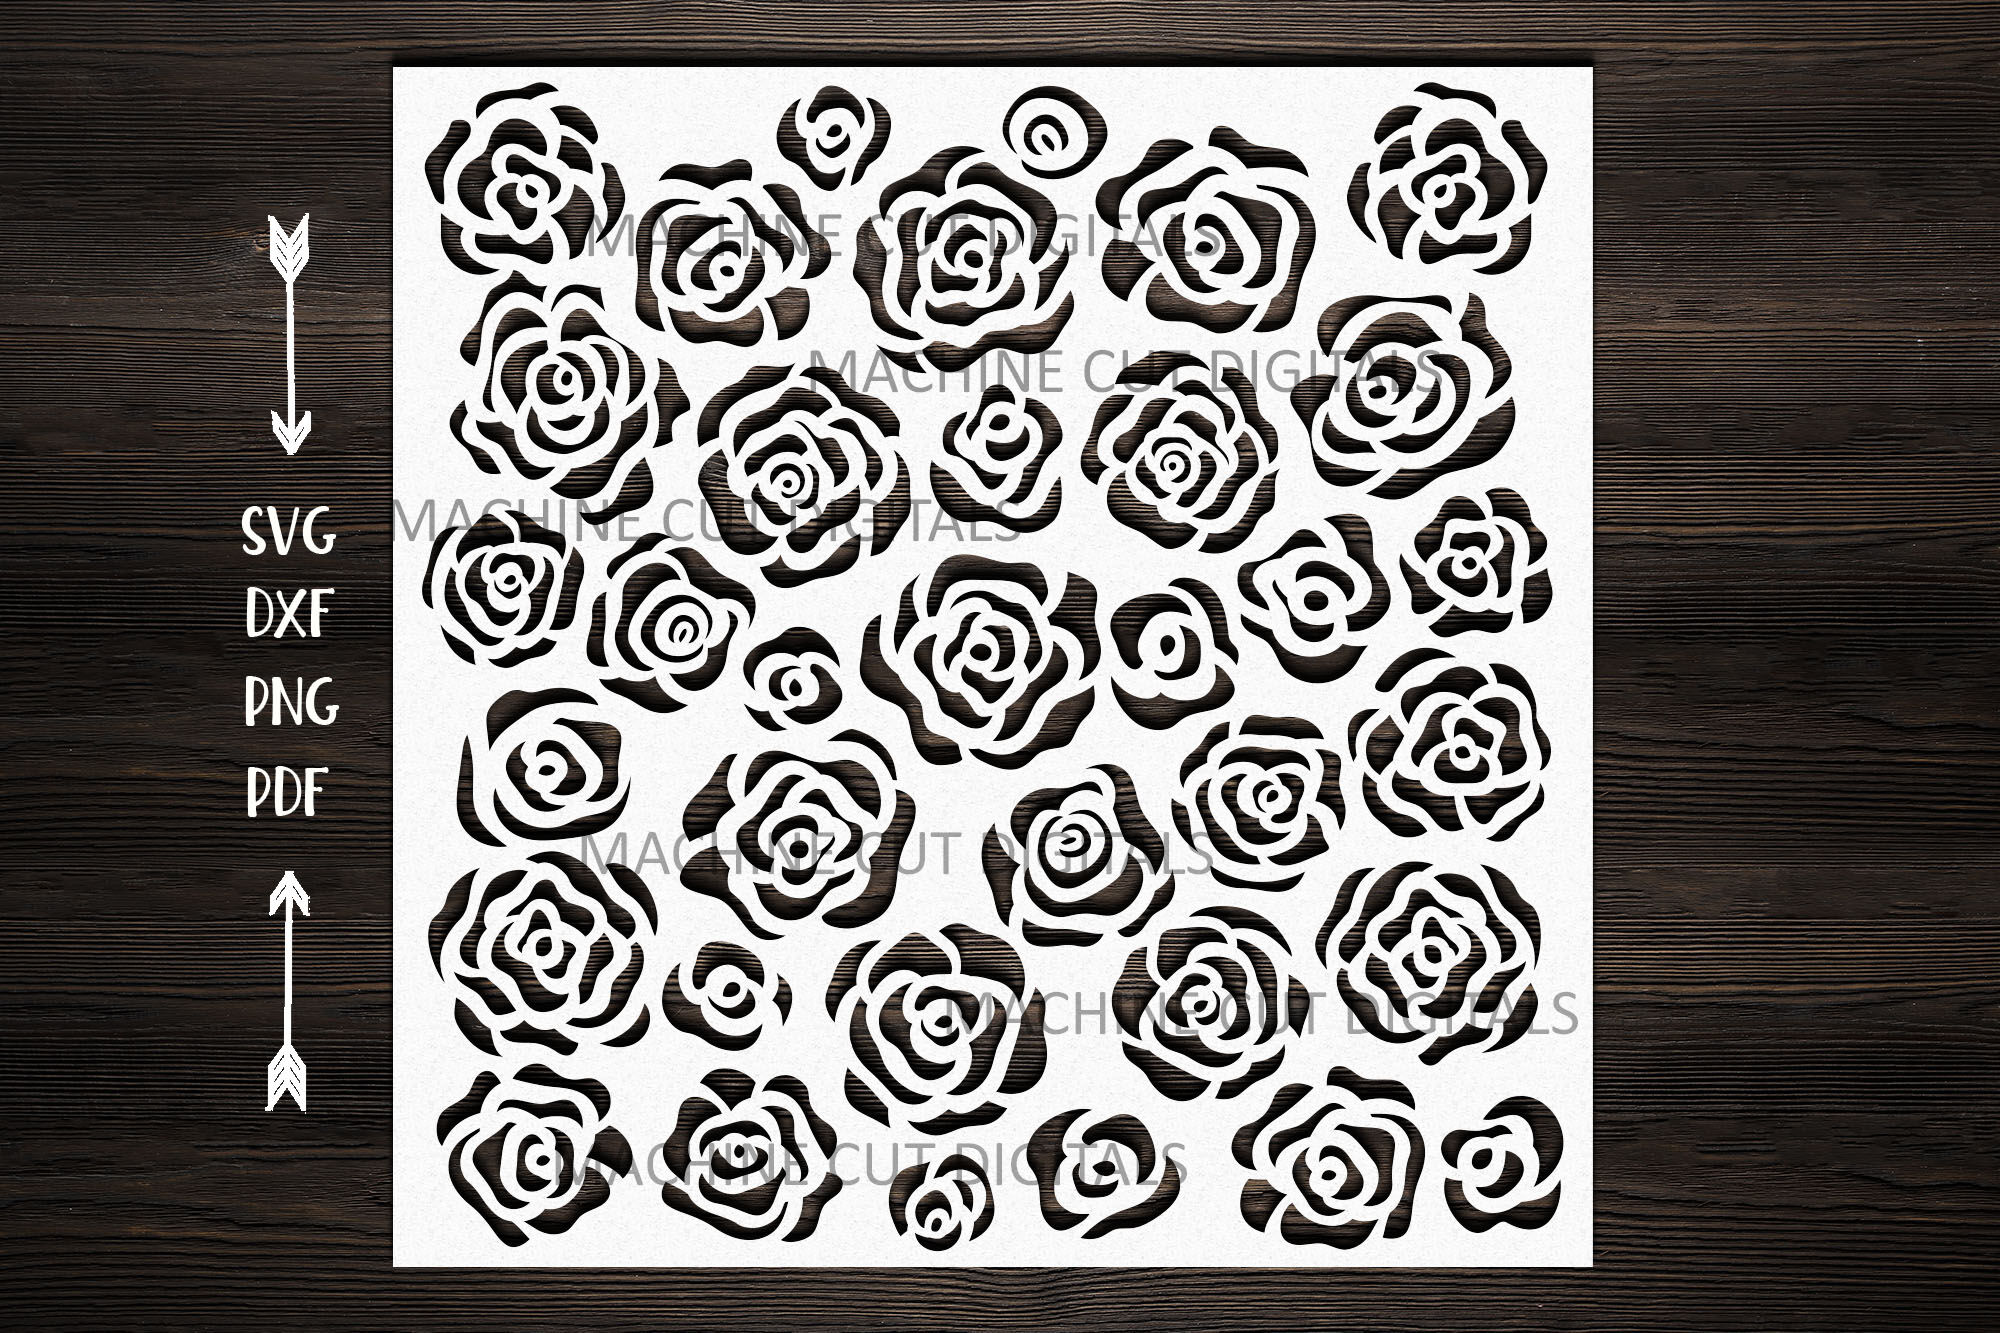 Floral Roses Square Pattern Stencil Svg Dxf Laser Cut File Template By Kartcreation Thehungryjpeg Com